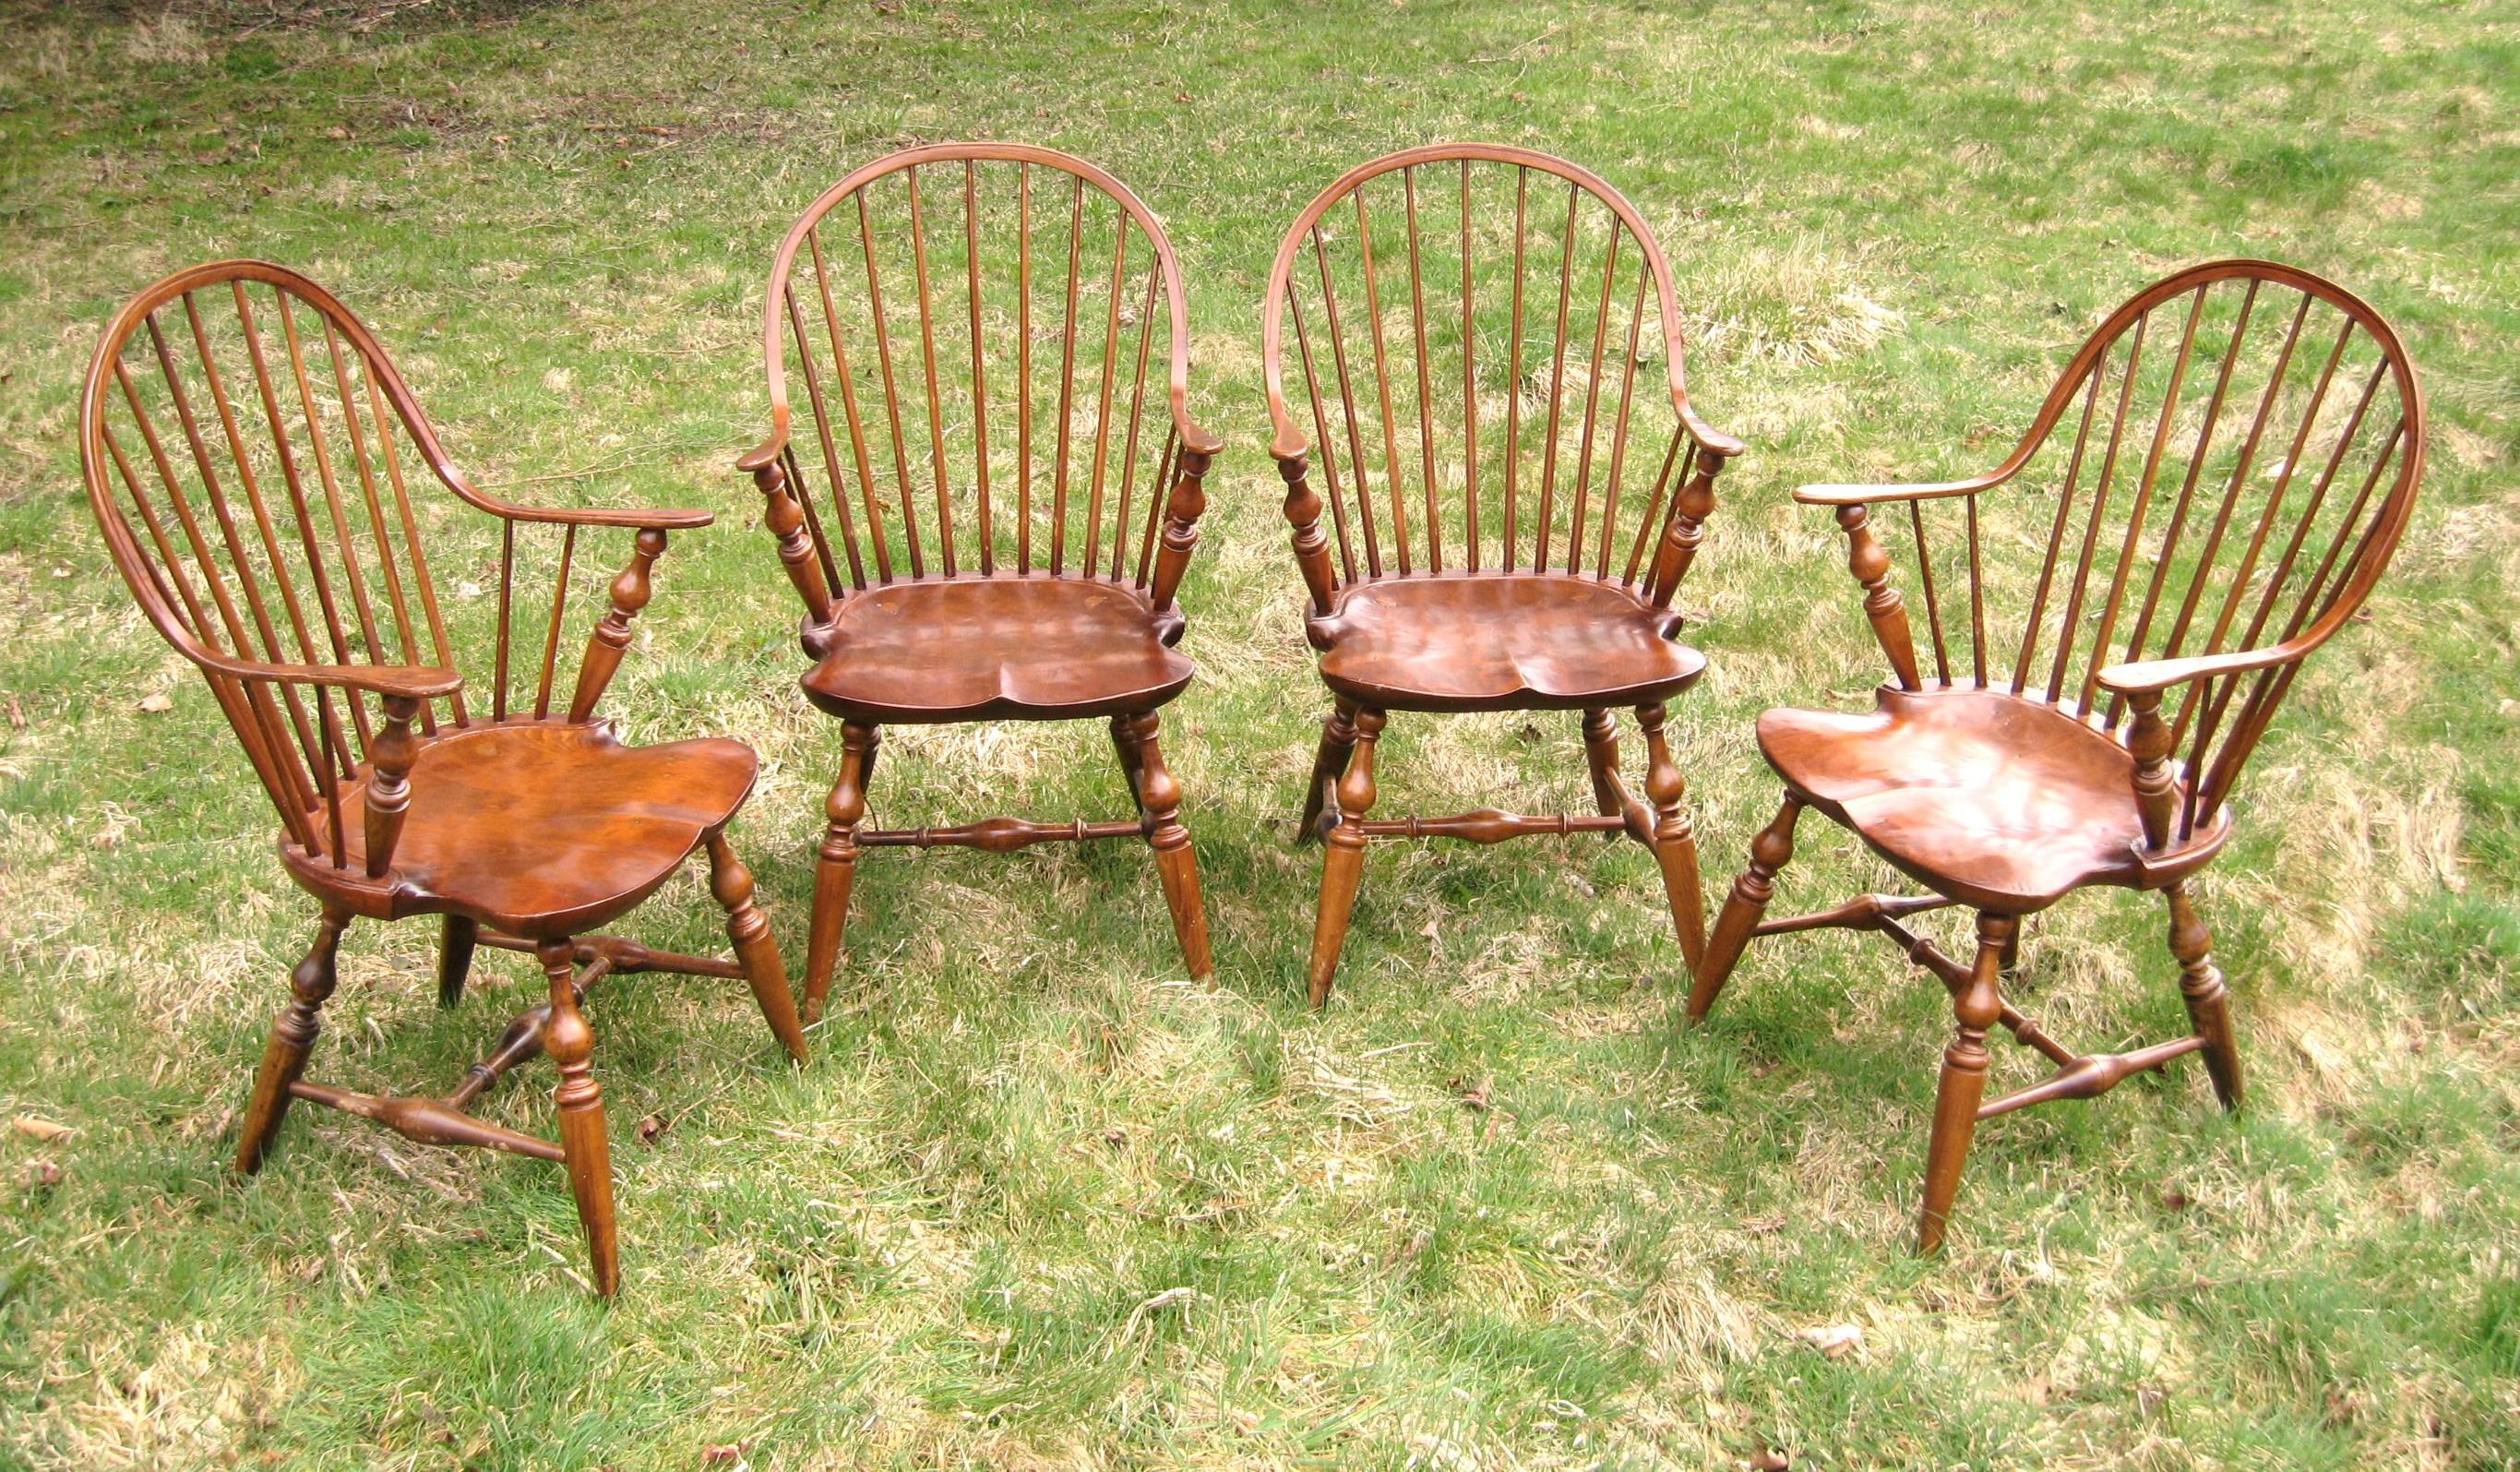 Here is a set of 4 Windsor style handcrafted continuous armchairs by B. Delin. The chair's design is a Classic Windsor shape consisting of a spindle back with, and a steam-bent arched crest continuing into the chair's arms. The seat is a shield